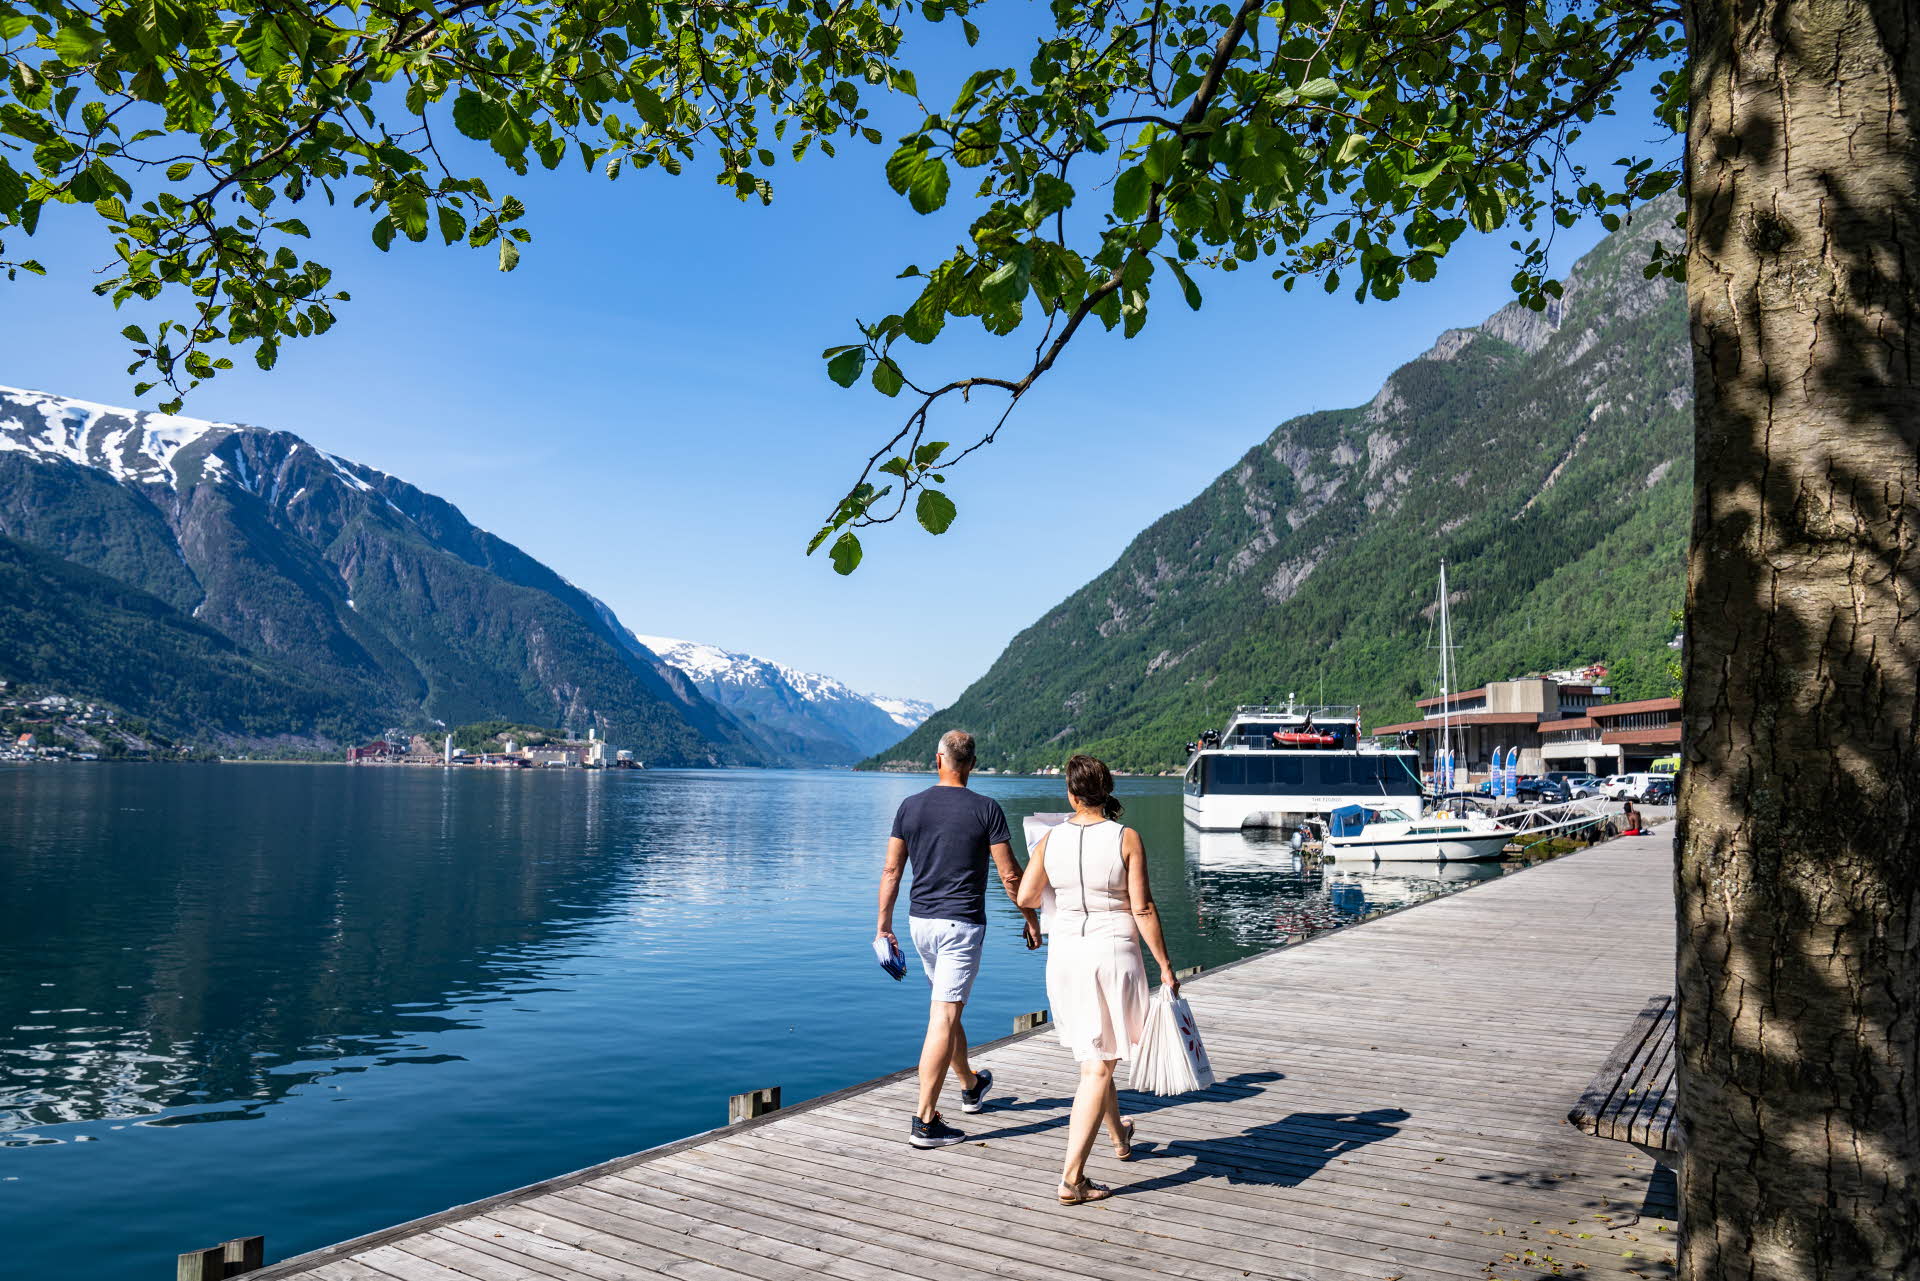 A couple holding hands while walking on a quay by the Hardangerfjord. Birch leaves above, boats in front of them and mountains with snowy peaks in the background.